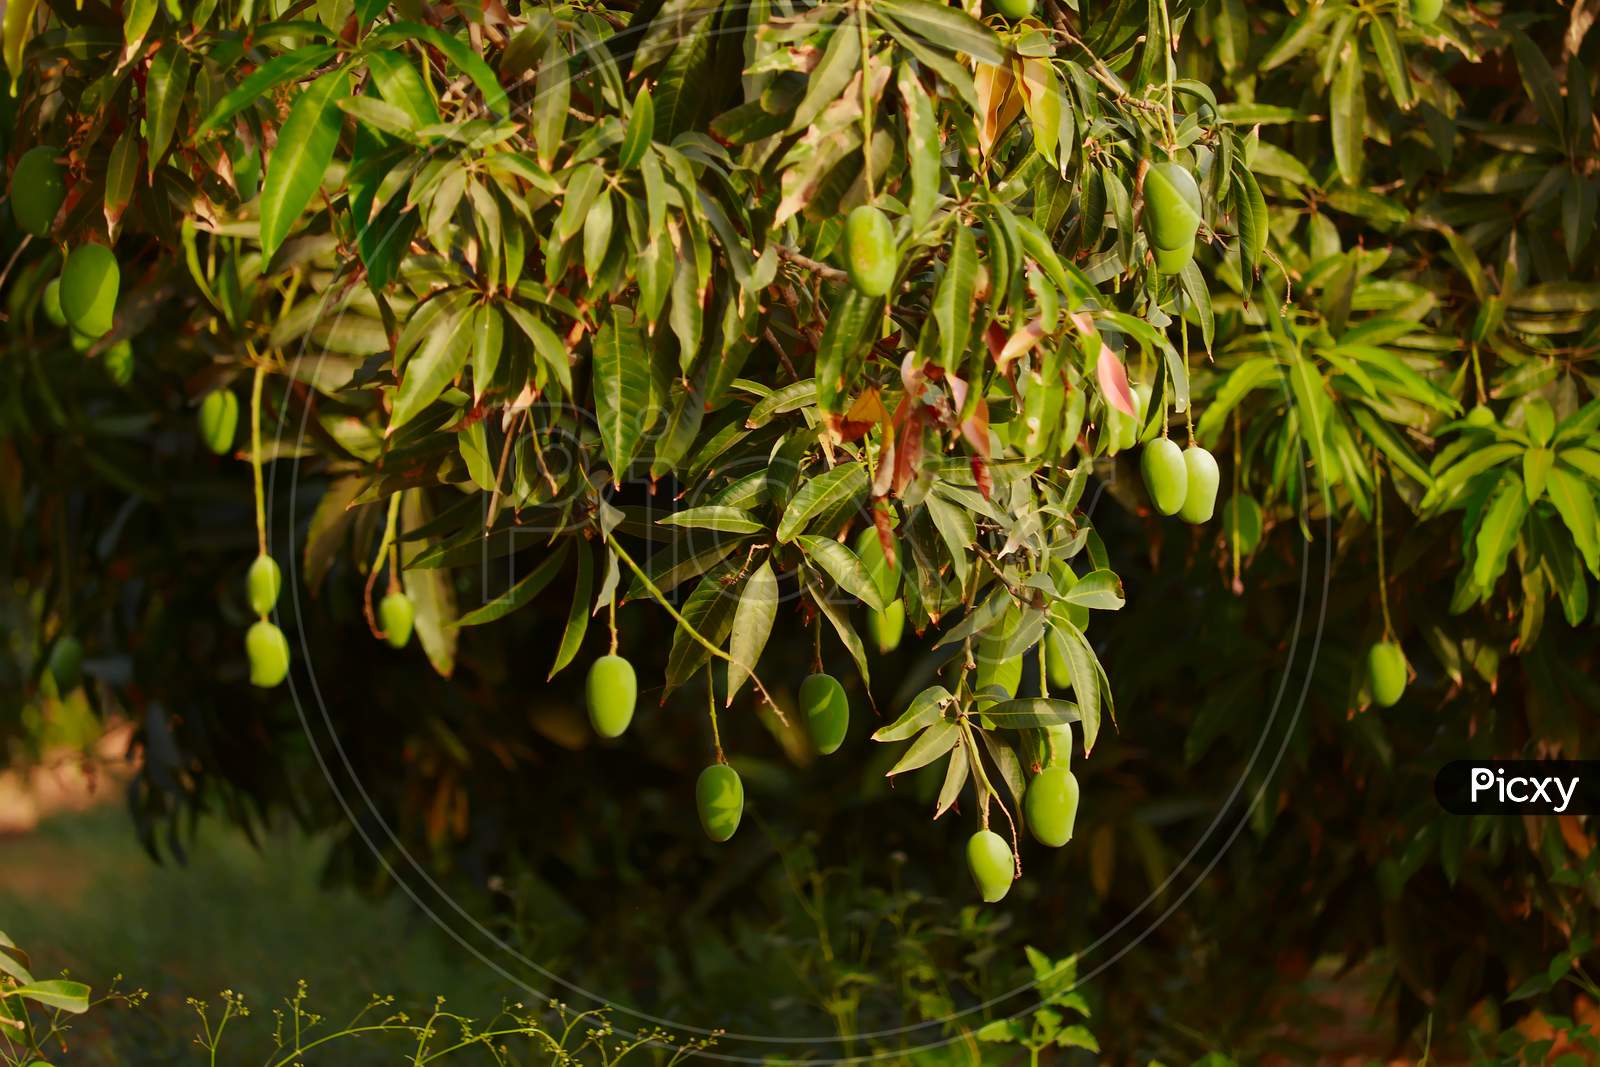 Mango Hanging On The Tree Of Mango Tree,Popular Fruit In India,Agriculture Of Mango Fruit,Agriculture Concept